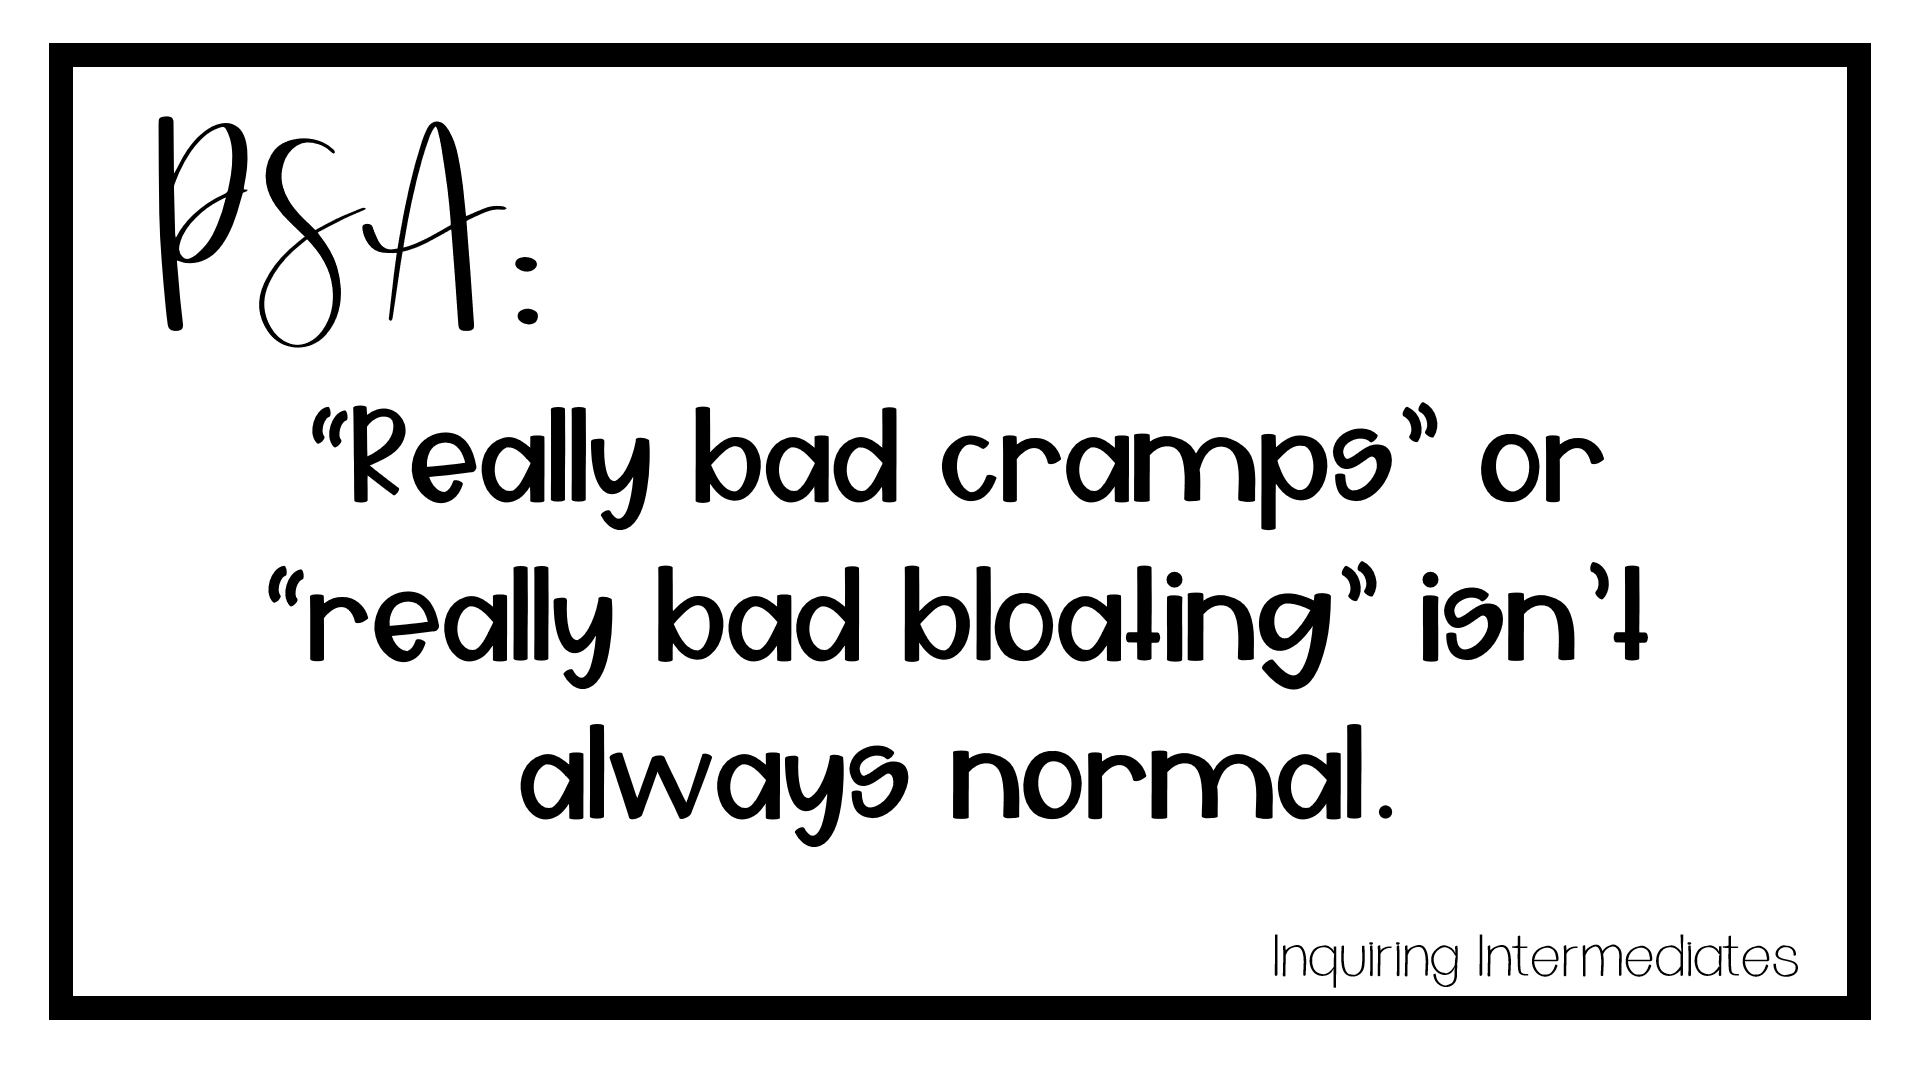 PSA: Really bad cramps or bloating is not always normal.